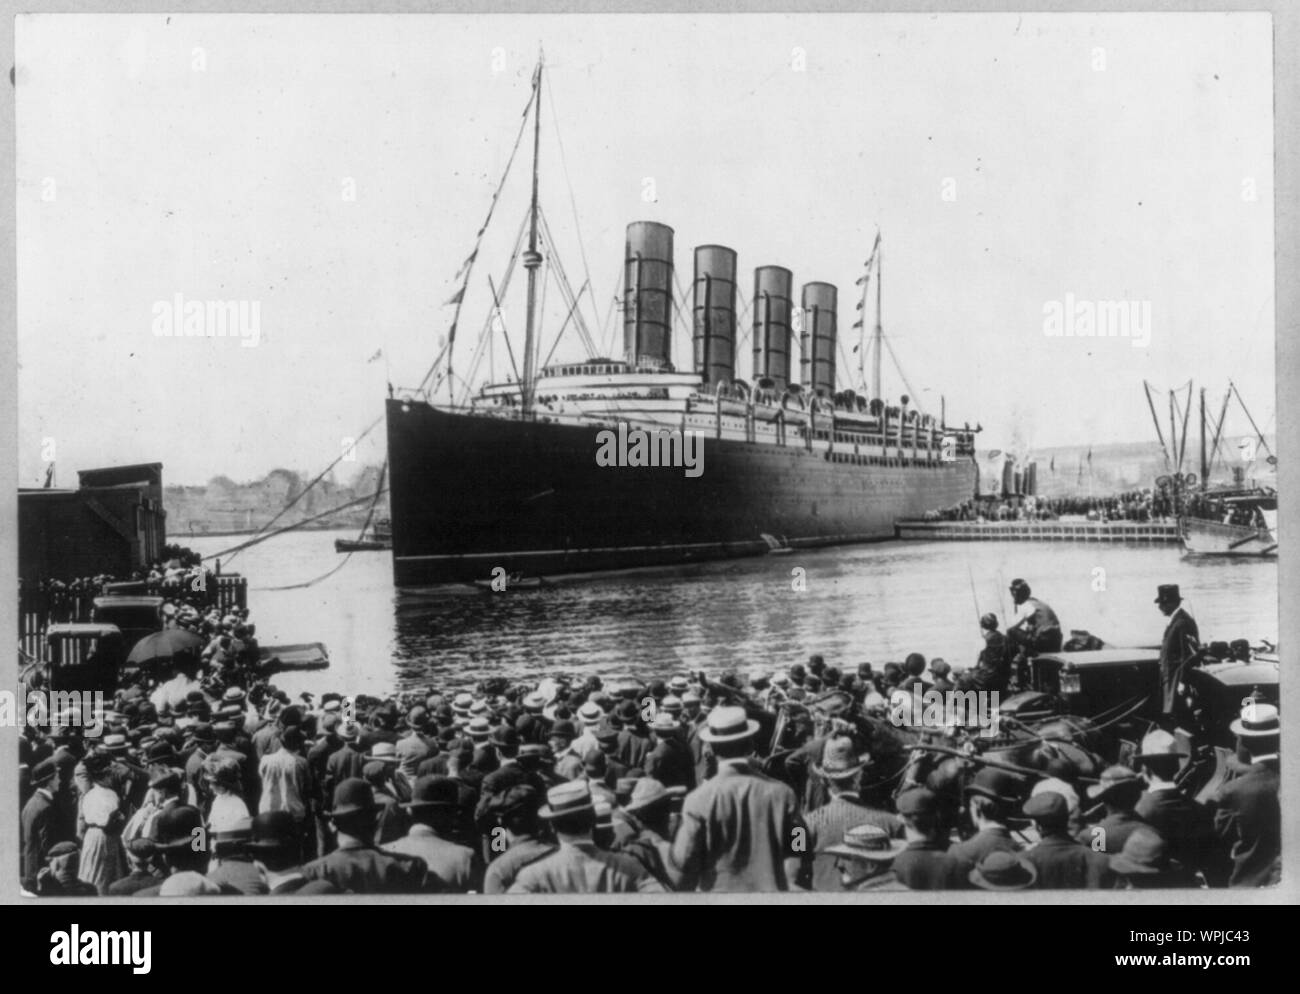 LUSITANIA, 1907-1914, New York City: warping into dock, NYC, 13 Sept. 1907, crowd in foregrd. Stock Photo